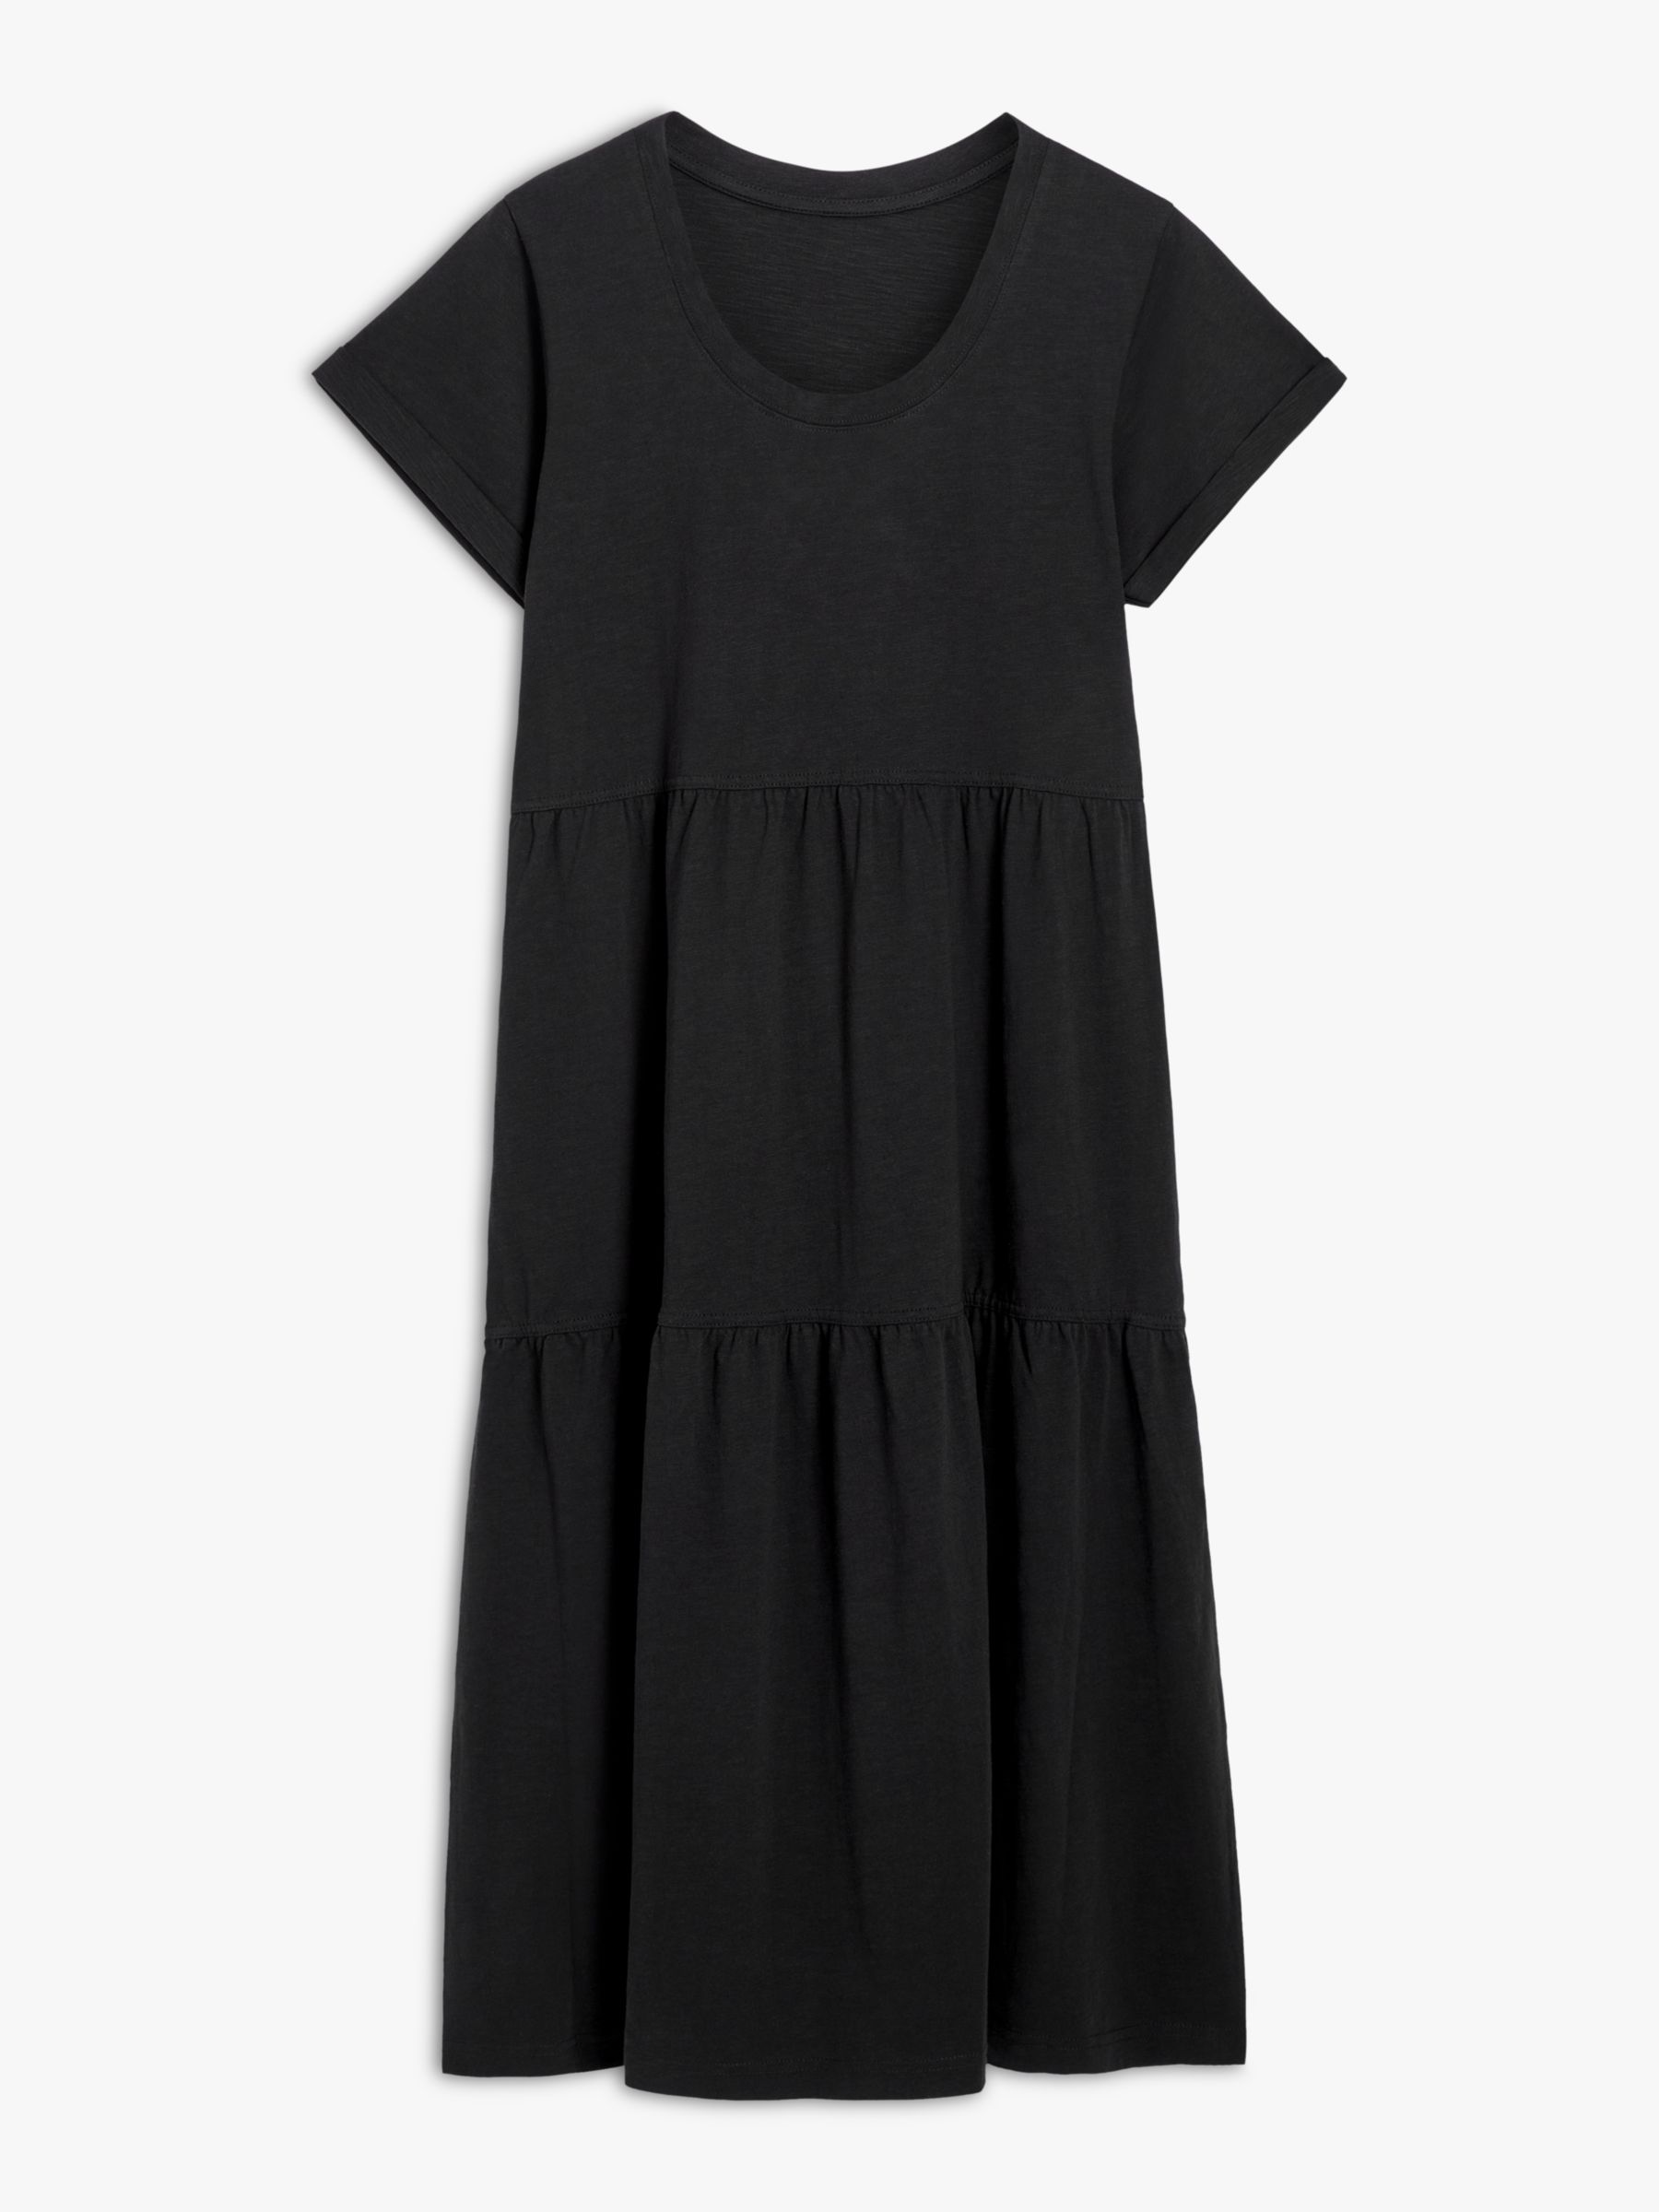 AND/OR Bernie Cotton Jersey Dress, Black, 6